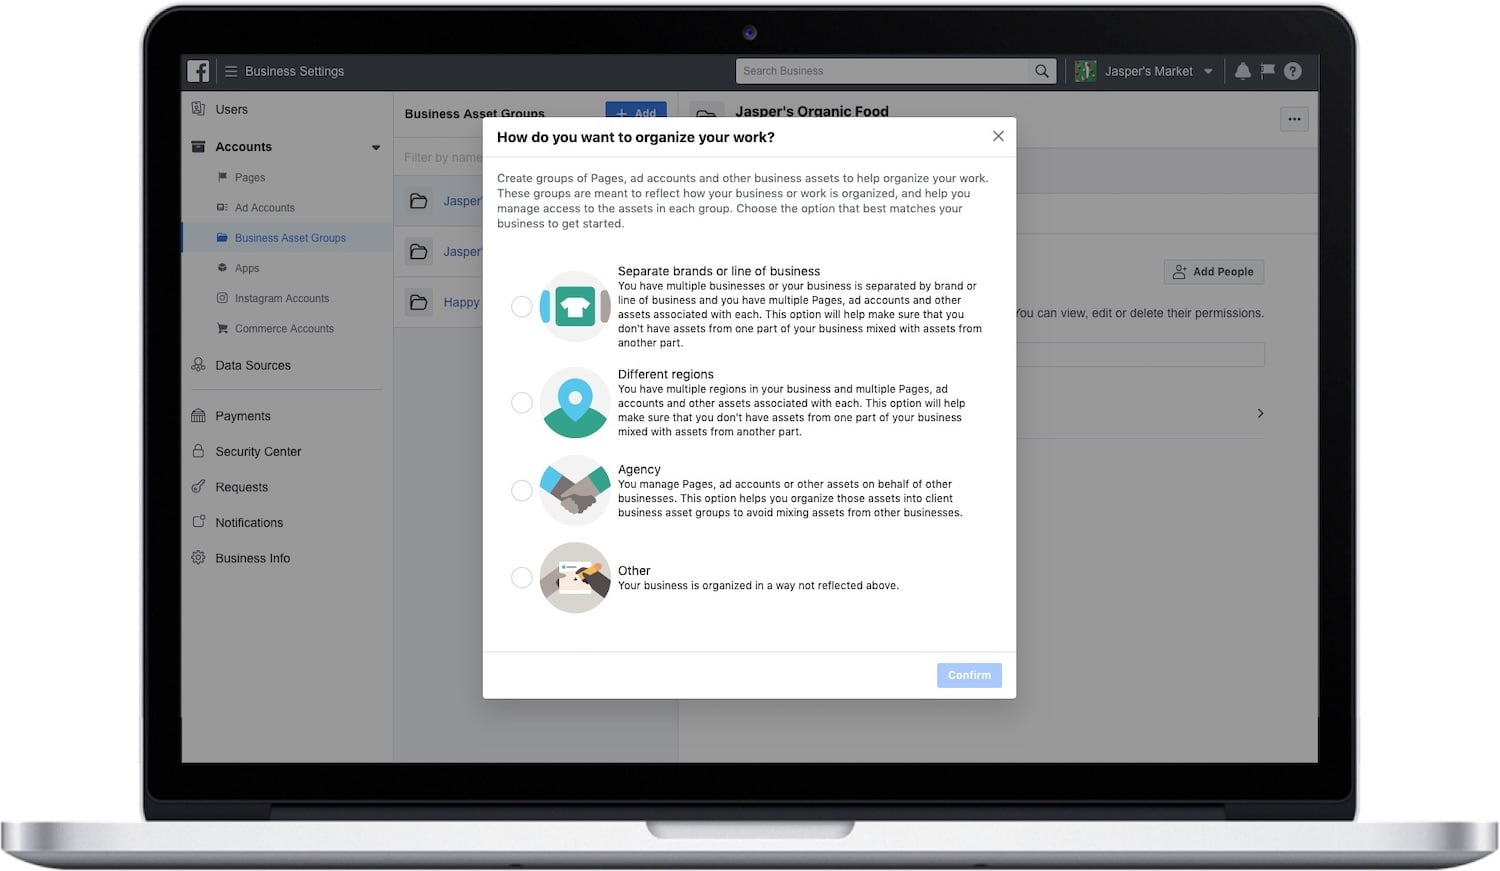 Facebook updates its Business and Ads Managers